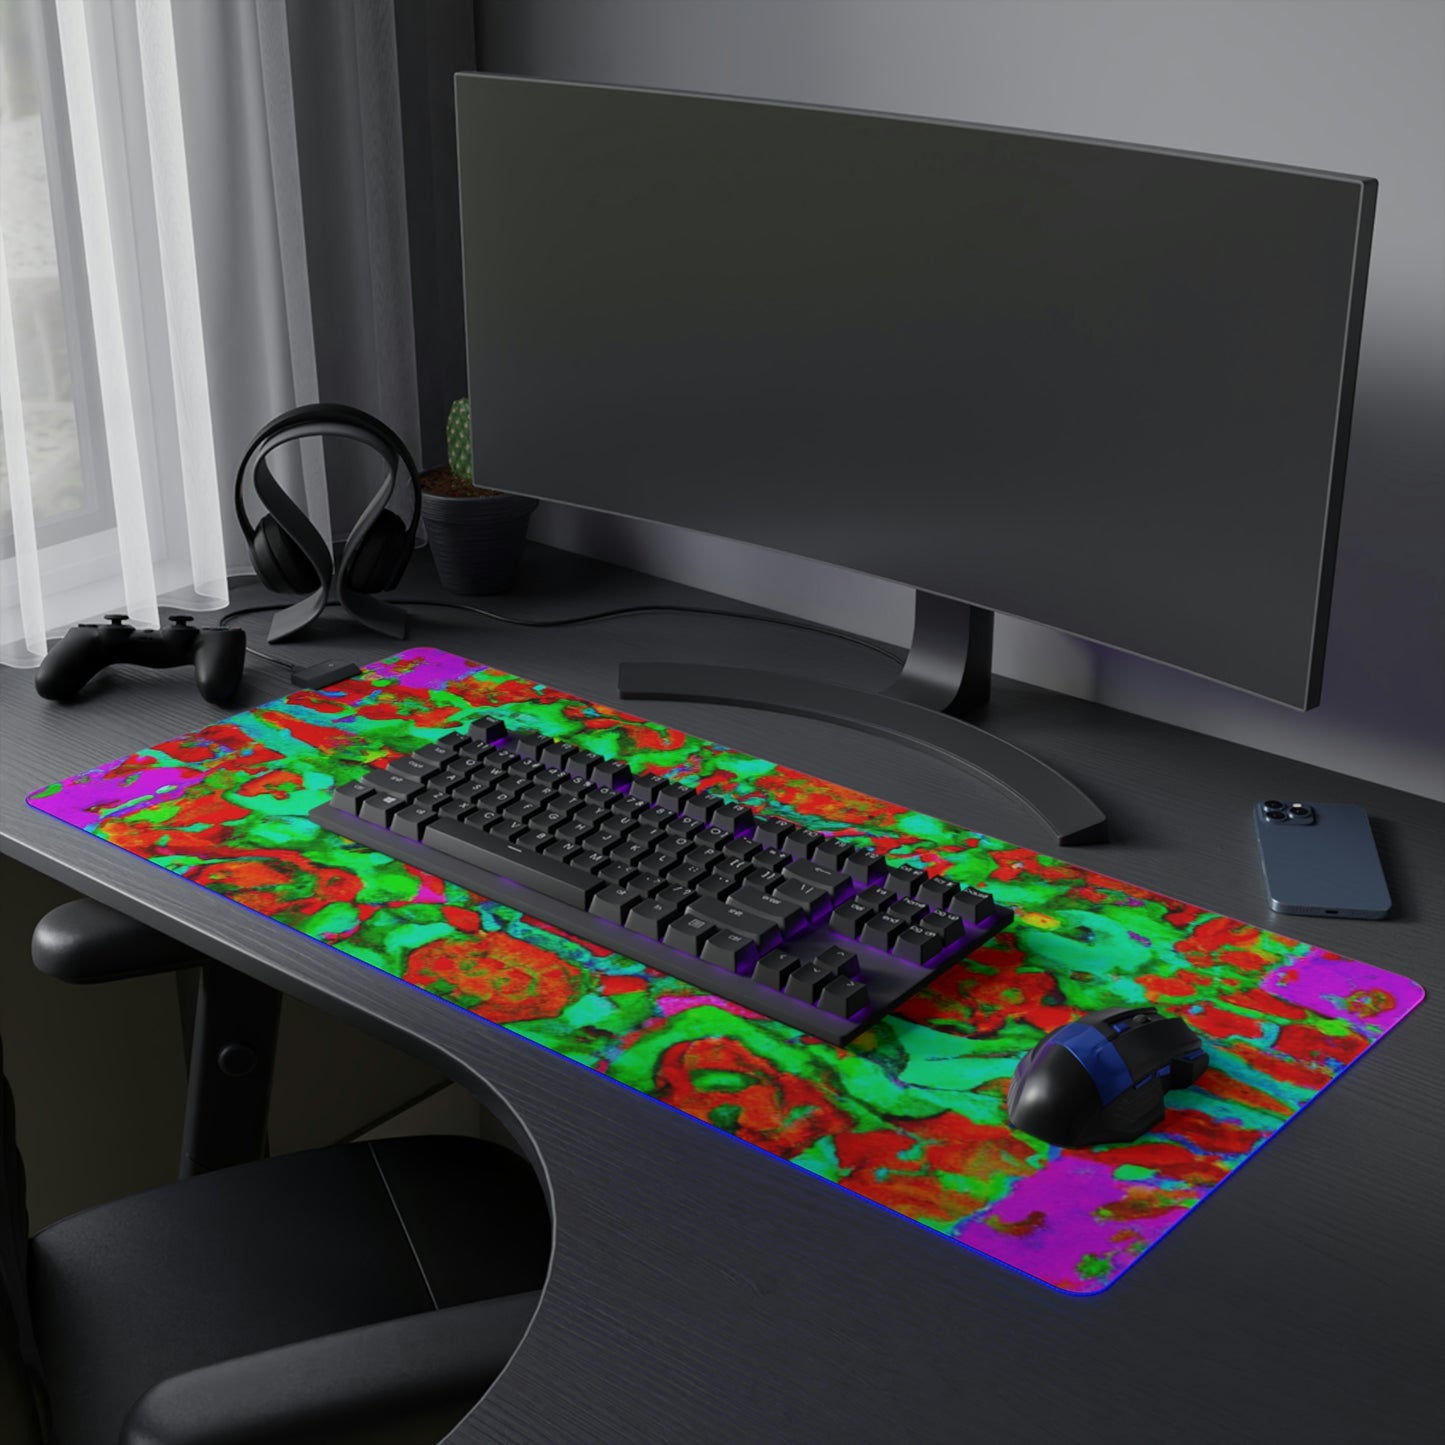 Sir Lancelot of King's Court - Psychedelic Trippy LED Light Up Gaming Mouse Pad